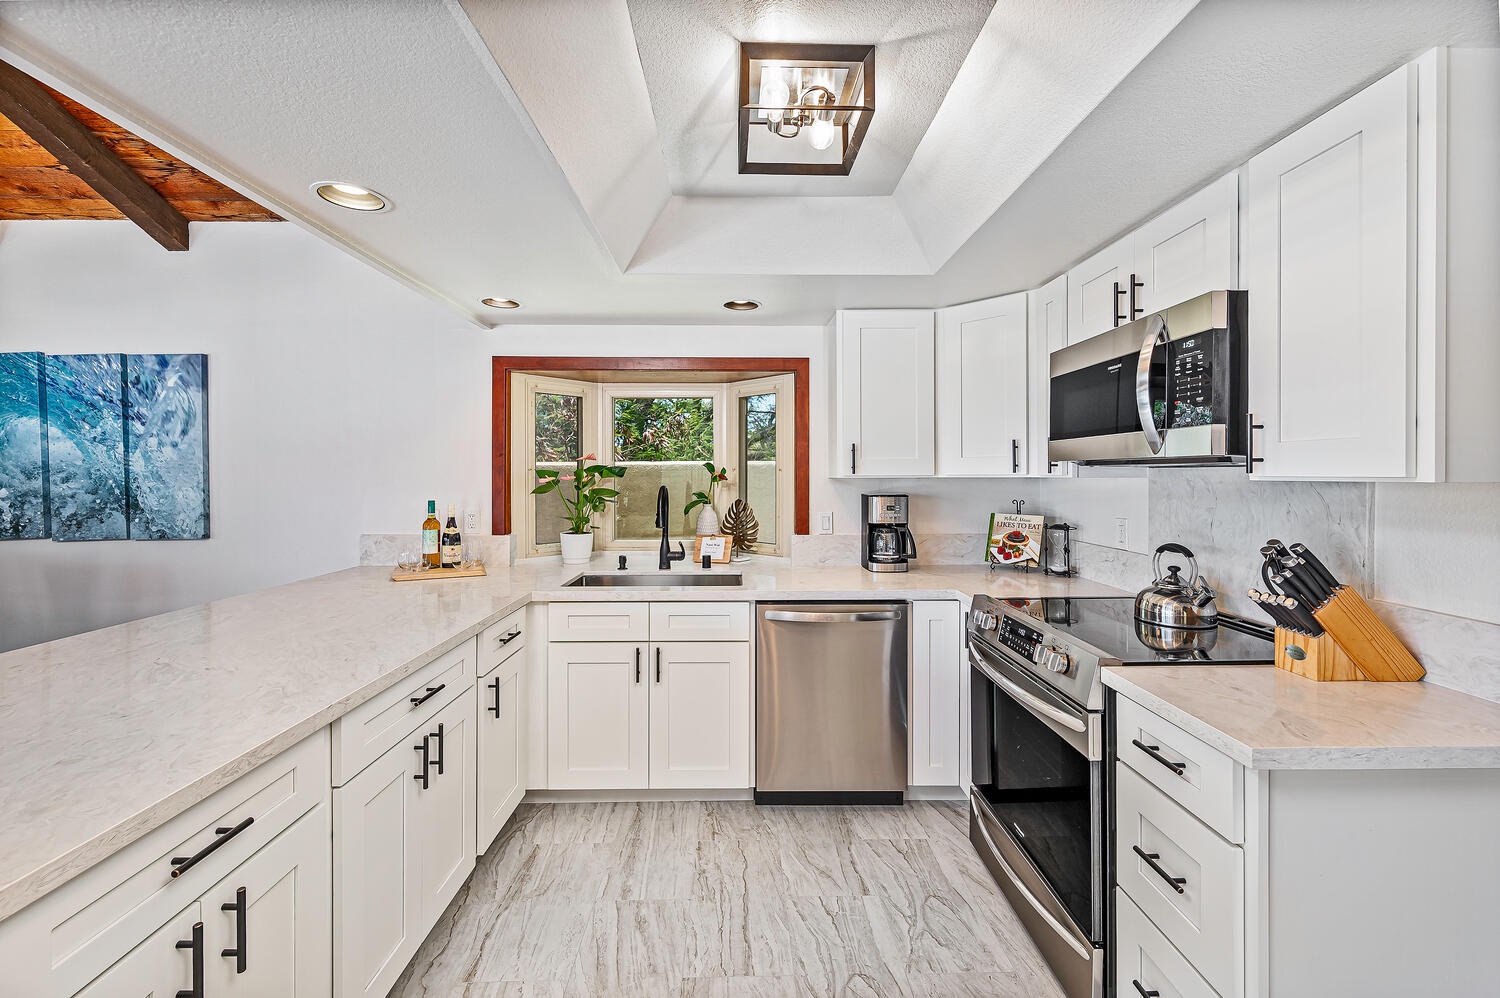 Honolulu Vacation Rentals, Nani Wai - Newly remodeled kitchen with top-of-the-line appliances!